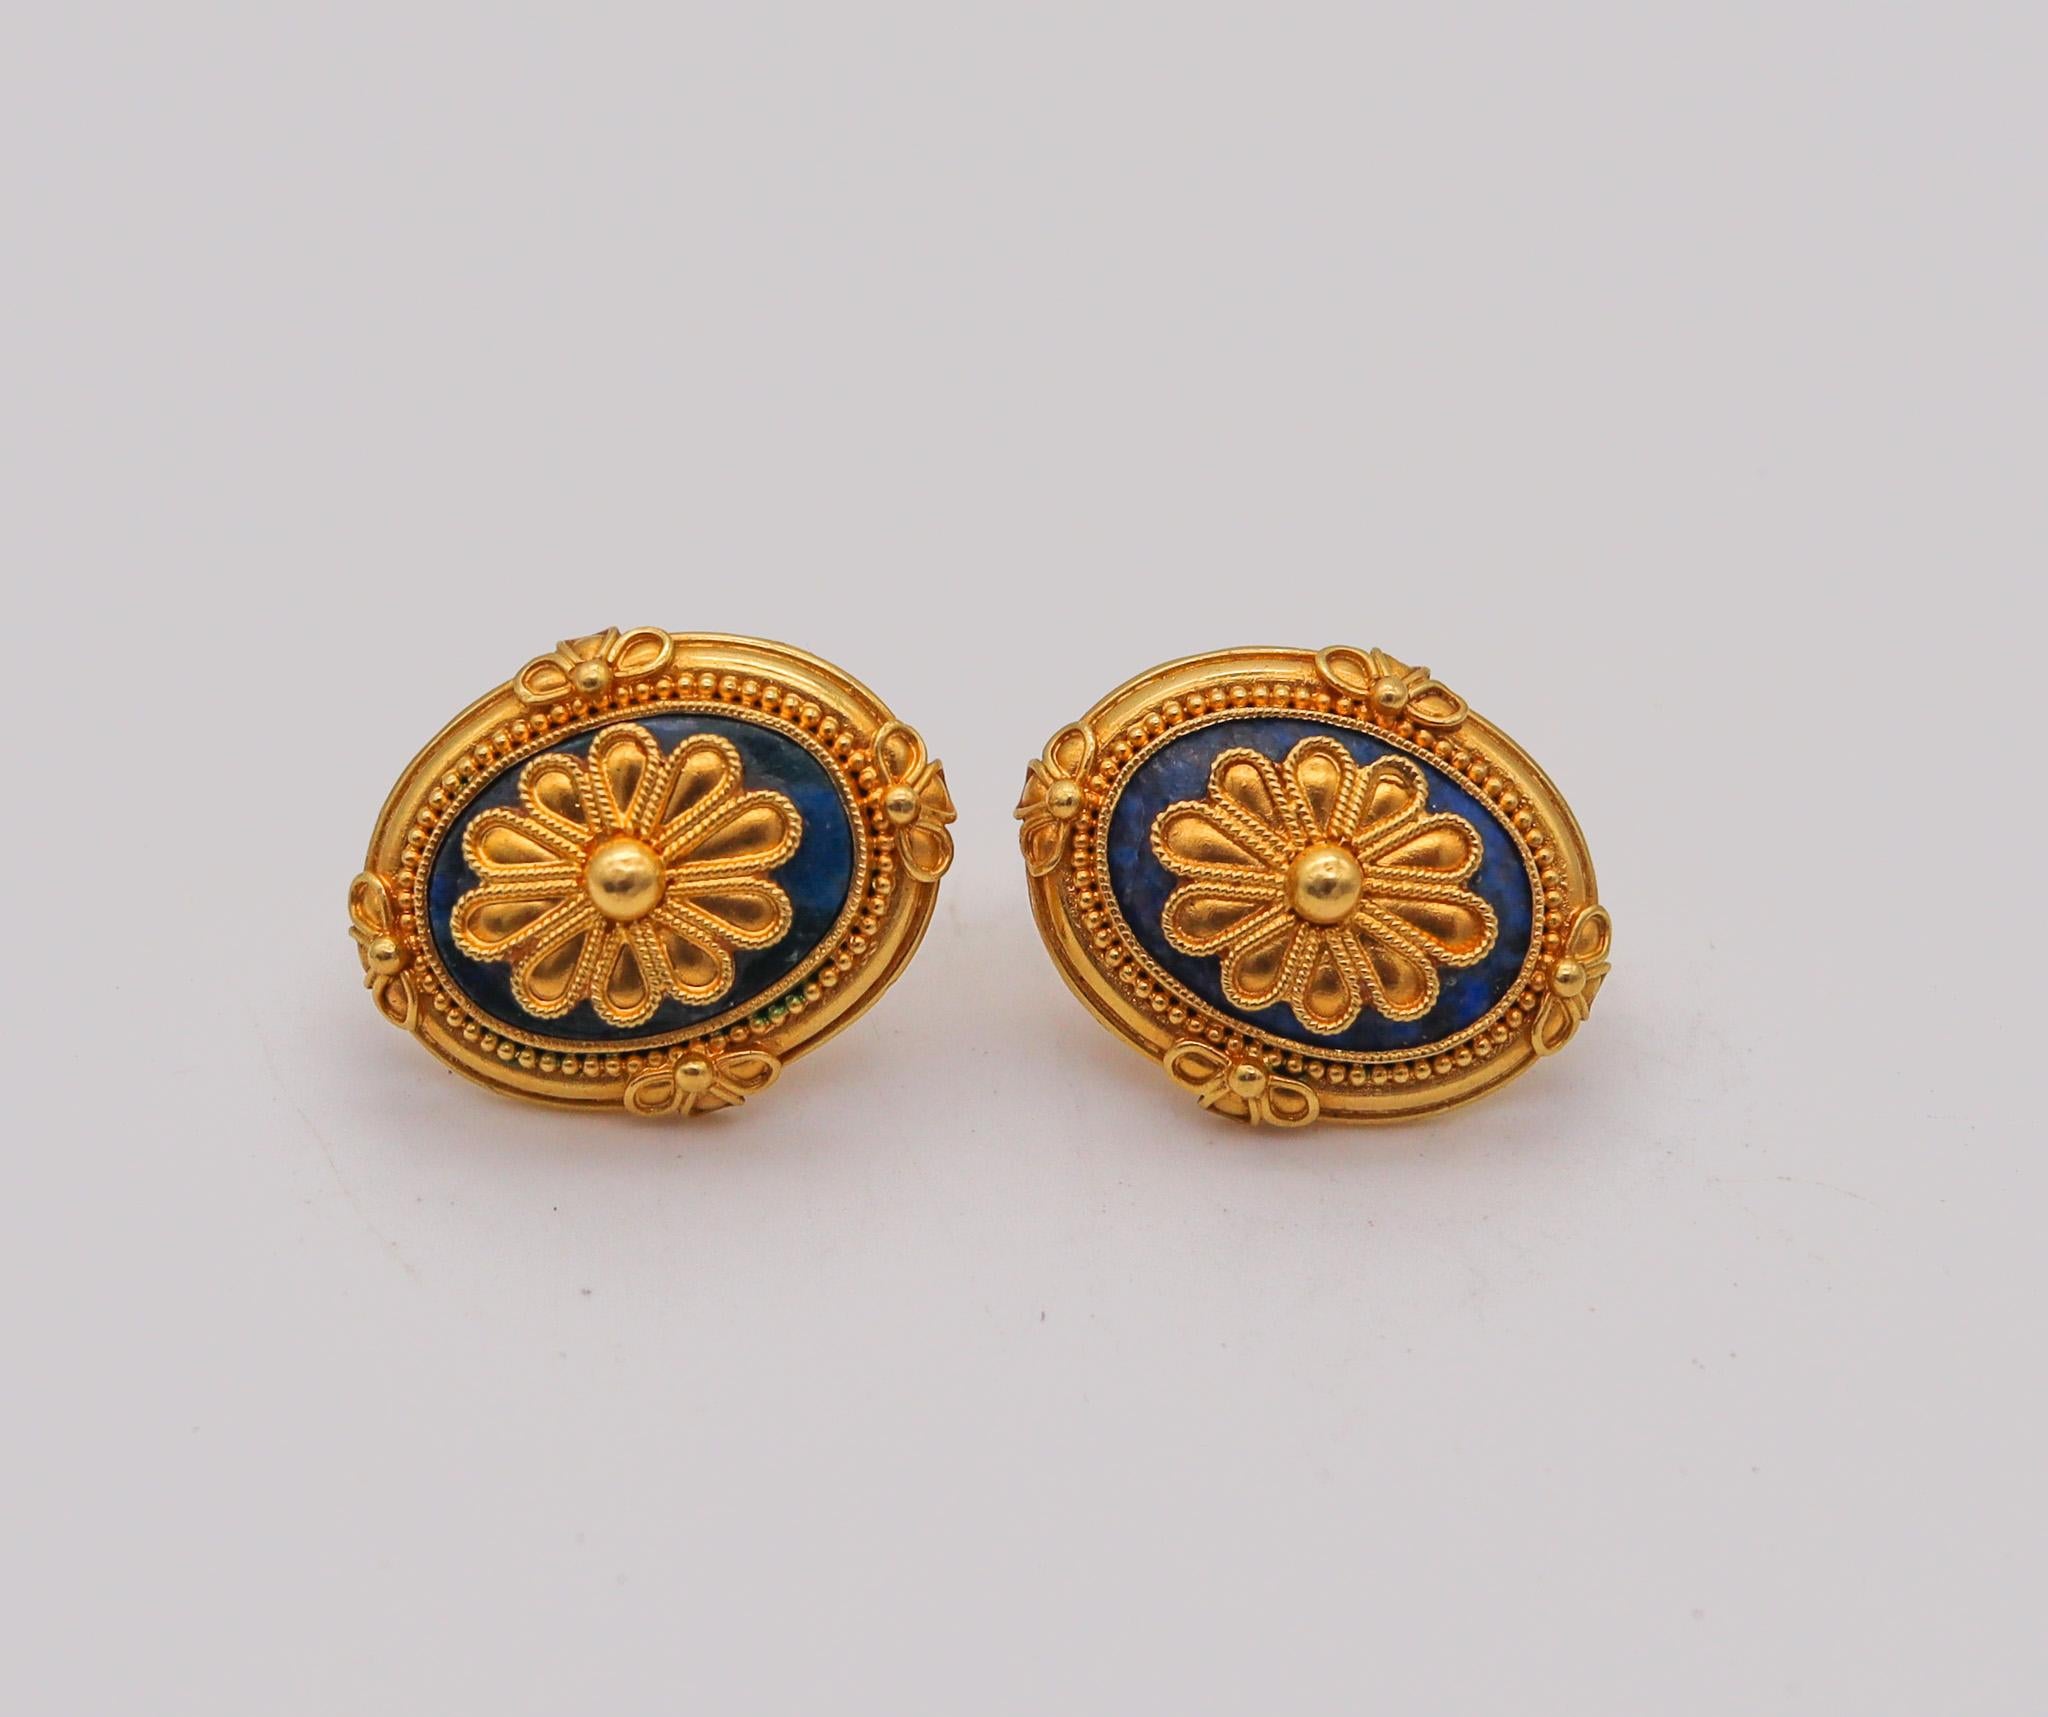 Greek revival earrings with lapis lazuli.

Beautiful pair of Hellenistic earrings, made in Greece in the style of the ancient Greeks with floreated designs. This pair has been crafted with oval shapes in solid yellow gold of 22 karats with highly